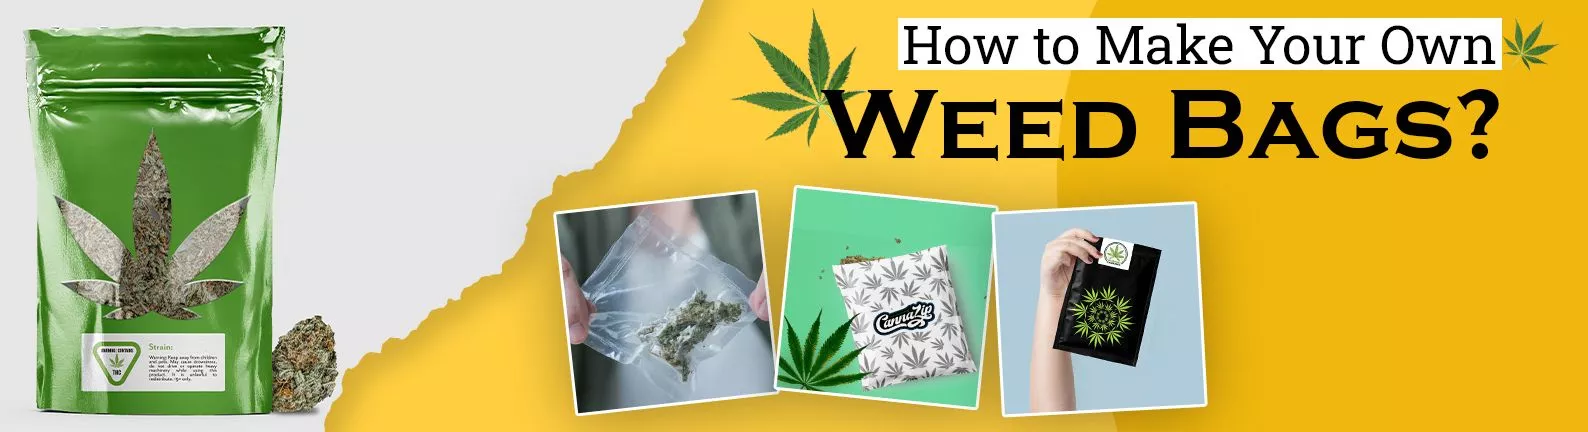 How-to-Make-Your-Own-Weed-Bags